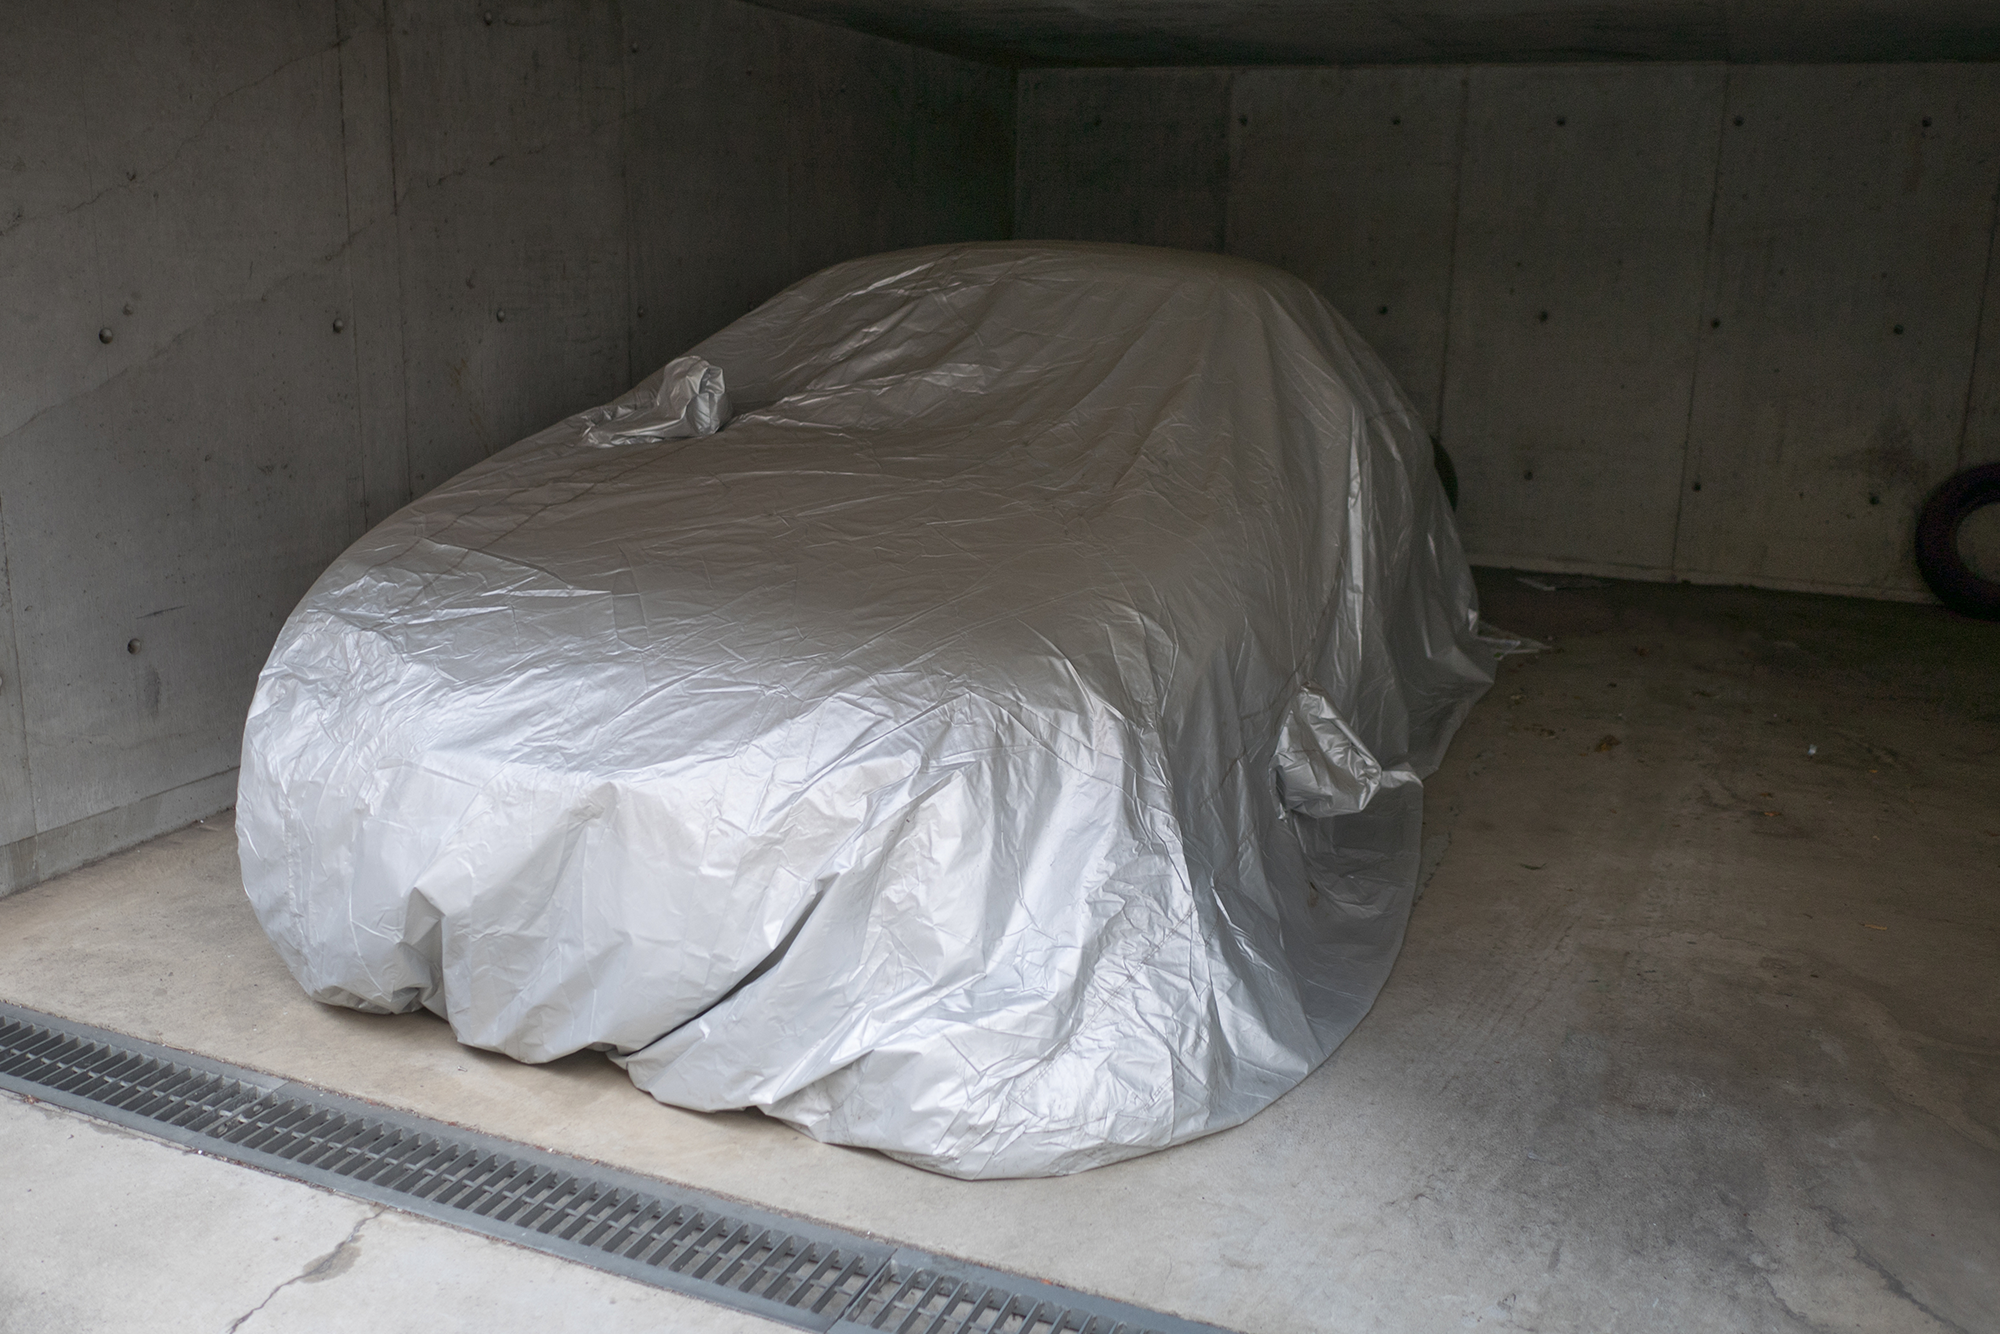 Winter vehicle storage: A car properly stored in a garage with a cover over the vehicle.